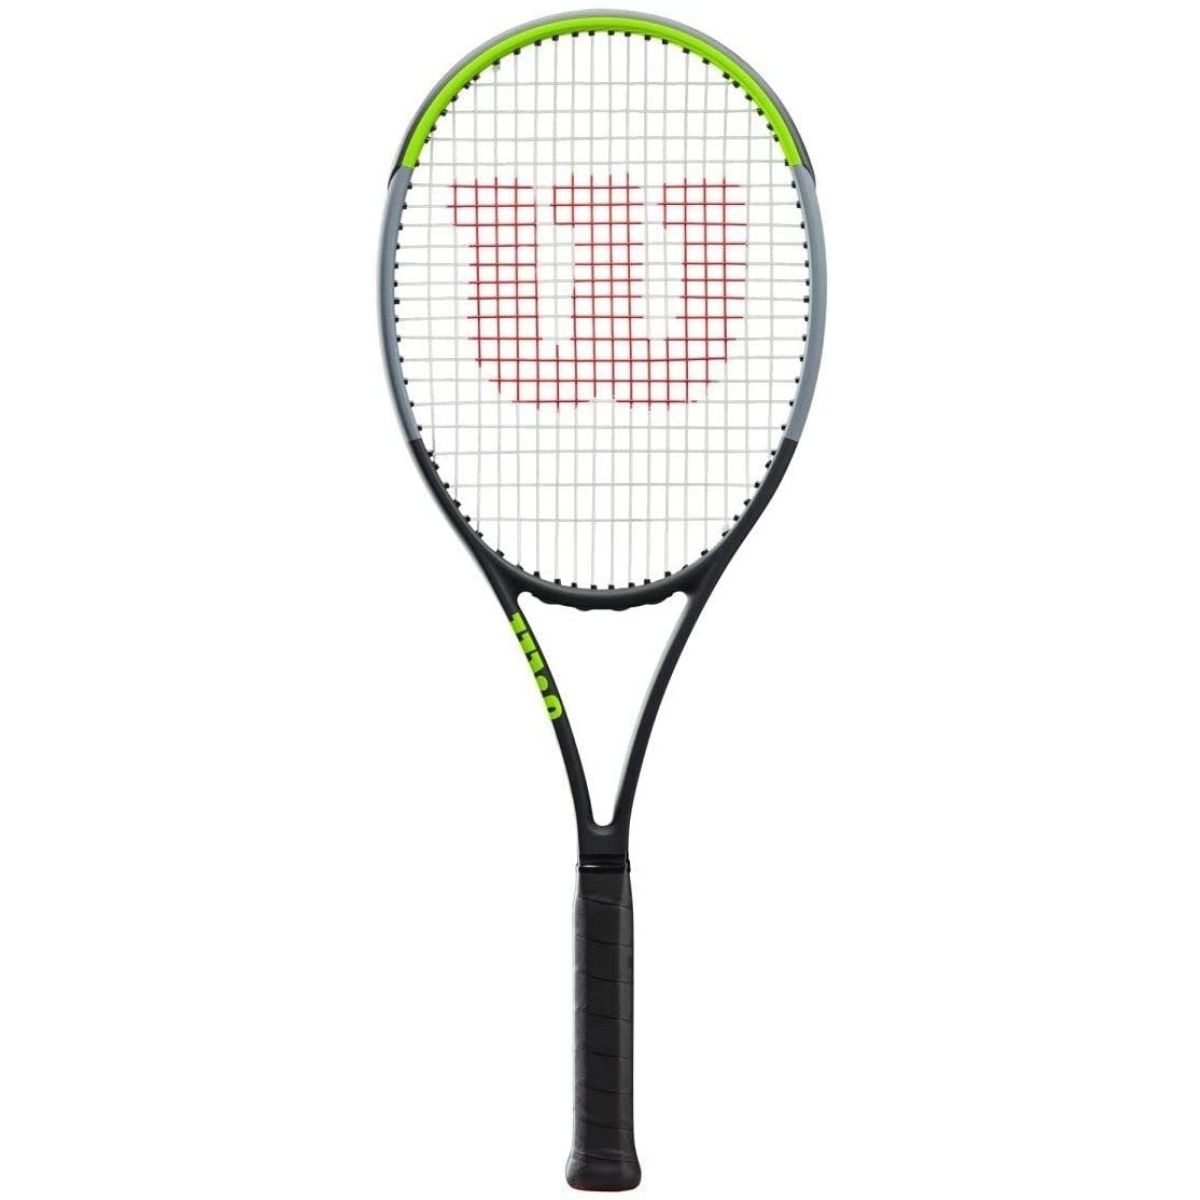 The Best Rackets for One Handed Backhand Options: Wilson Blade 98